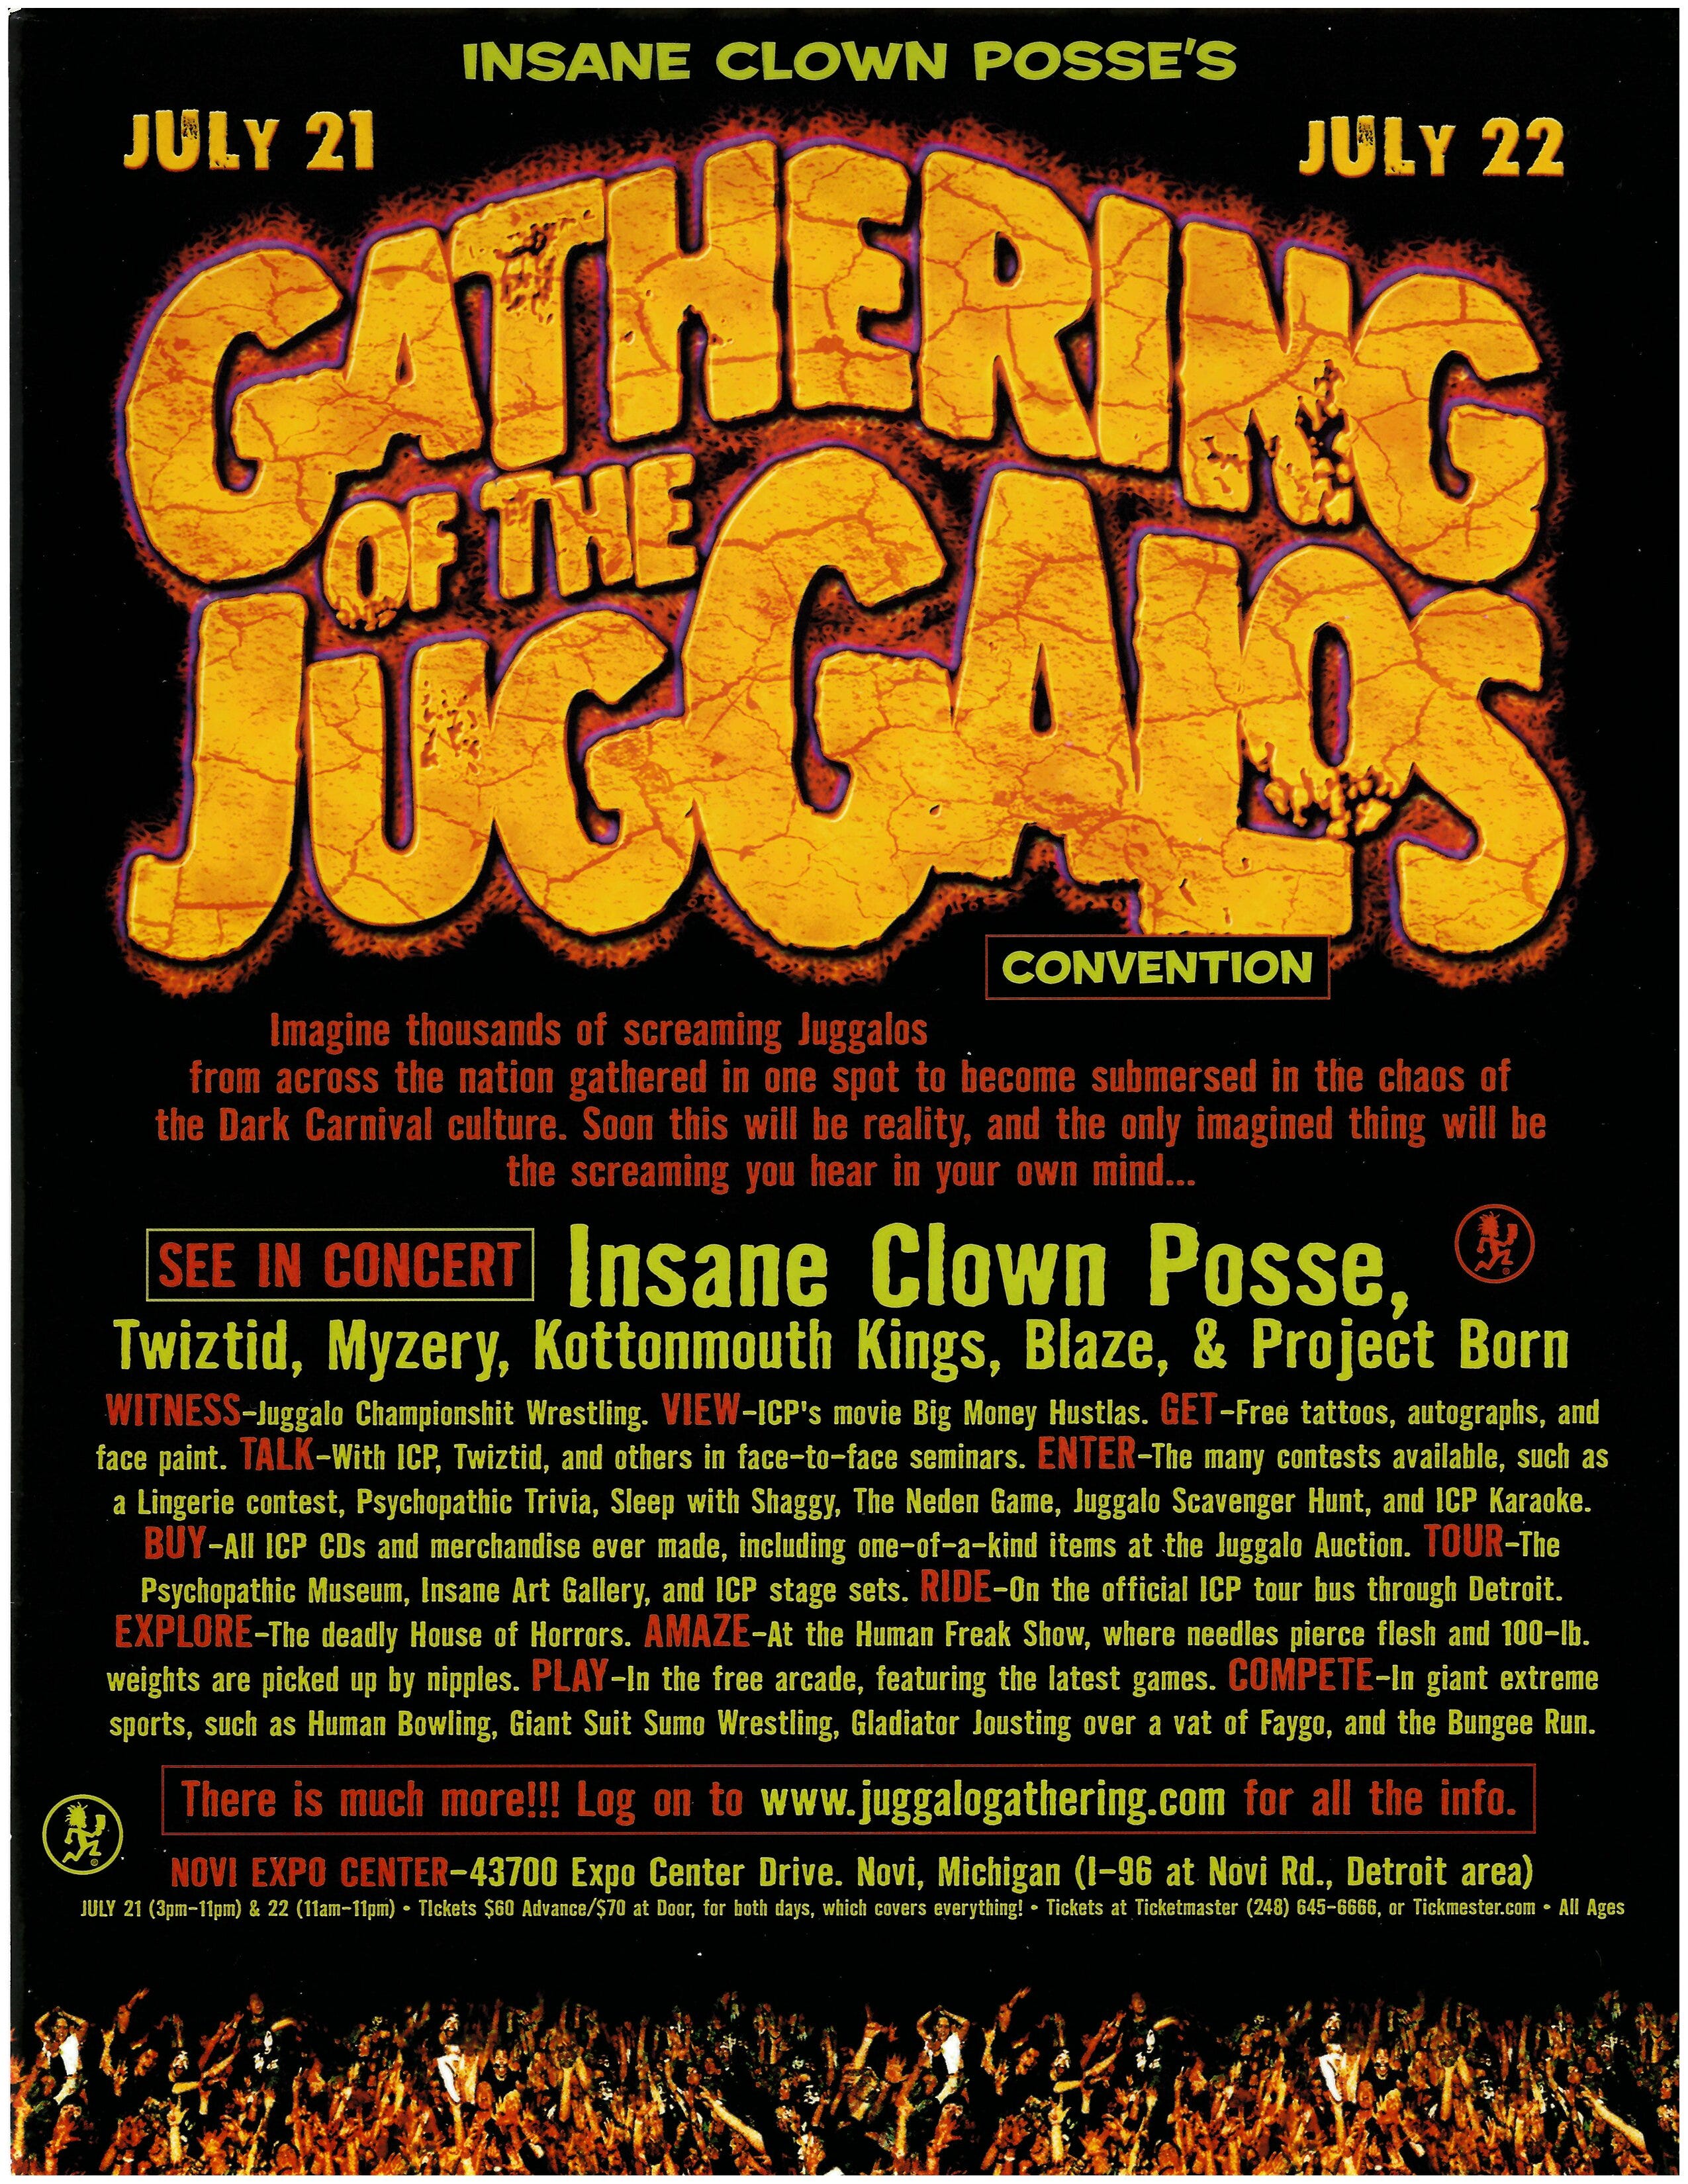 Flyer for the first Gathering of the Juggalos convention at the Novi Expo Center, July 21st and 22nd, 2000.